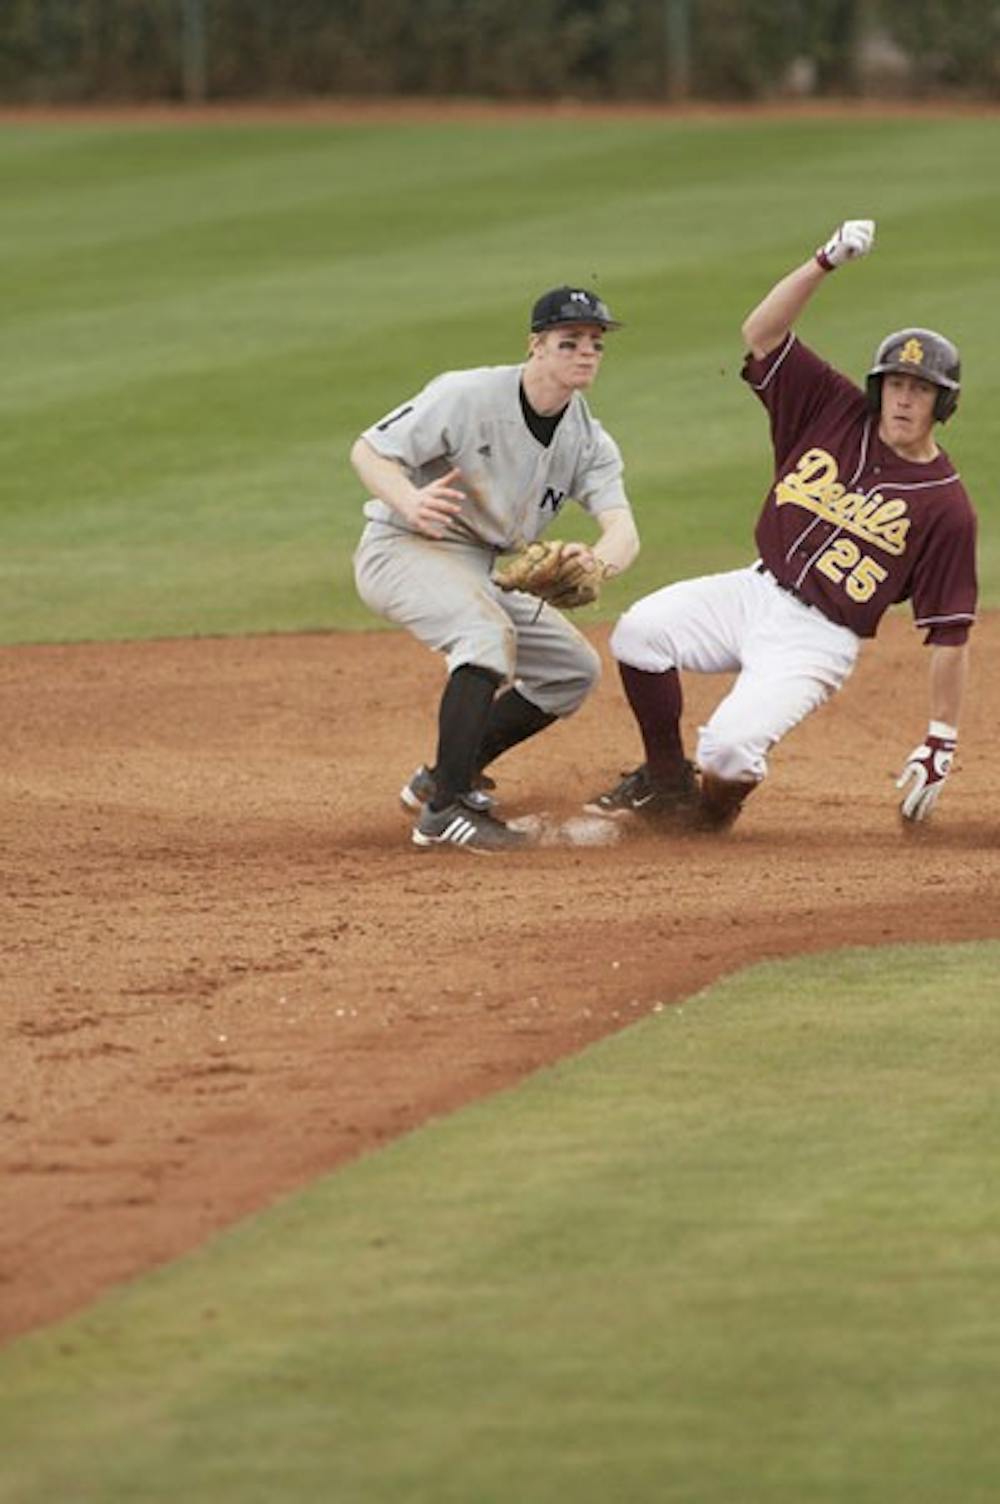 HE'S SAFE: Sophomore infielder Zach Wilson slides into second base in the Sun Devils’ win against Northern Illinois. (Photo by Scott Stuk)